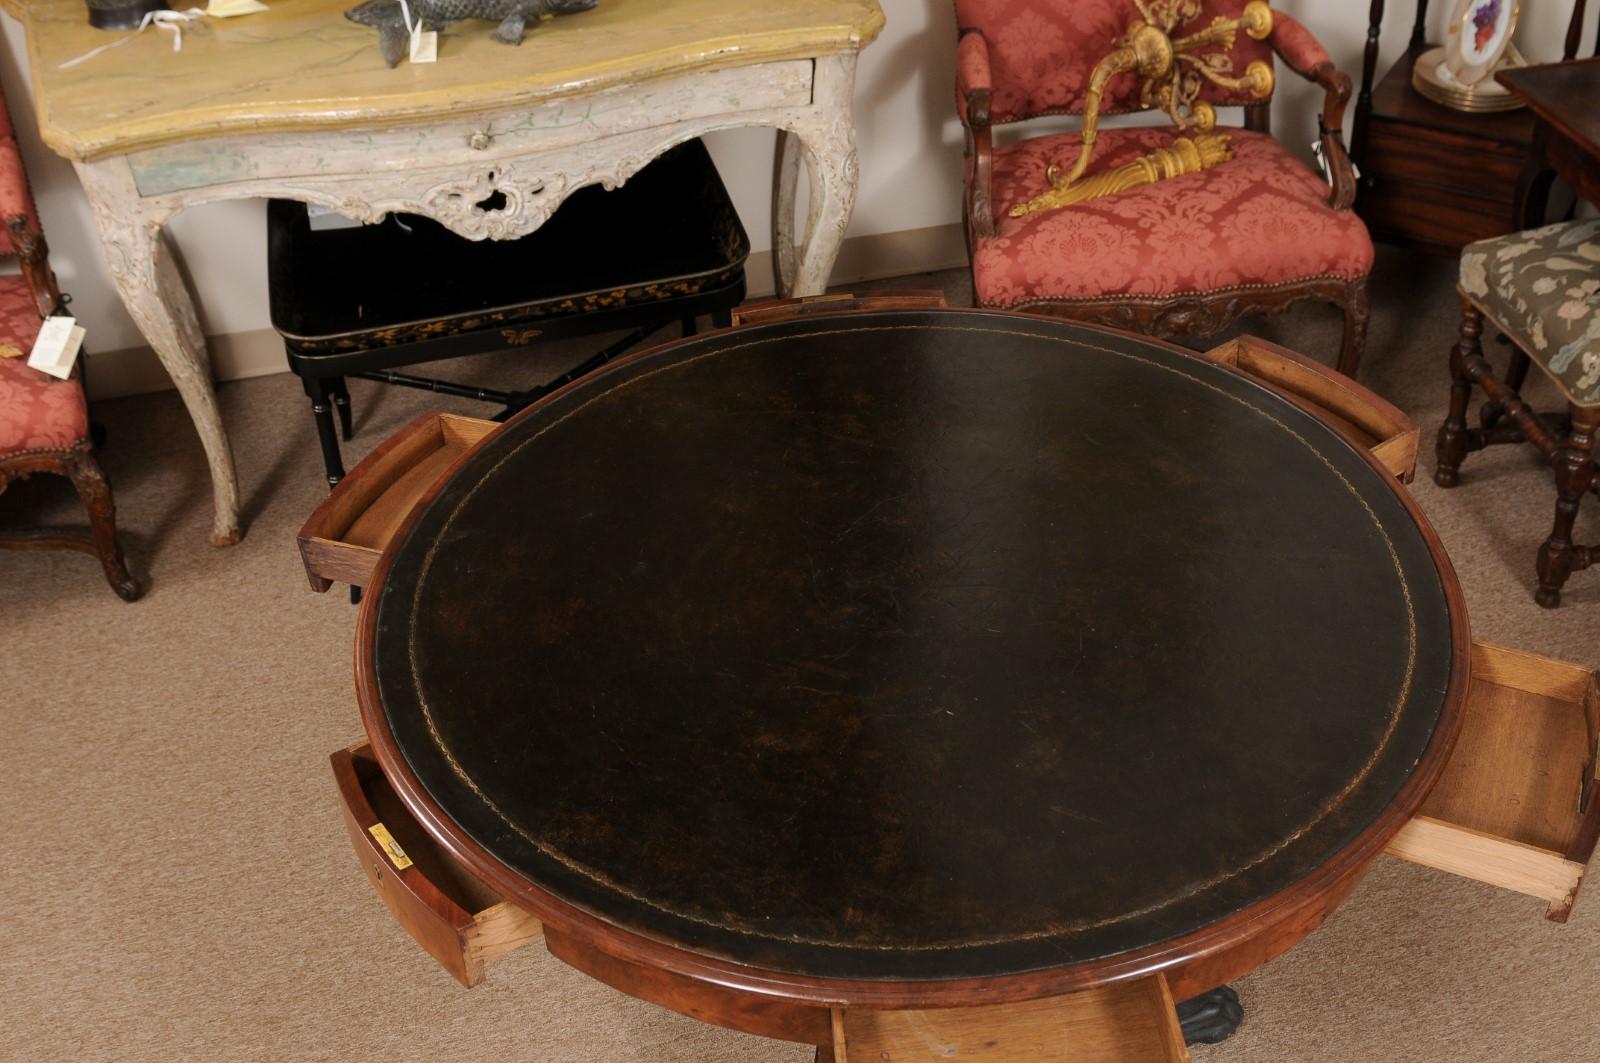 Early 19th Century French Empire Rotating Center Table with Black Leather Top & Ebonized Paw Feet